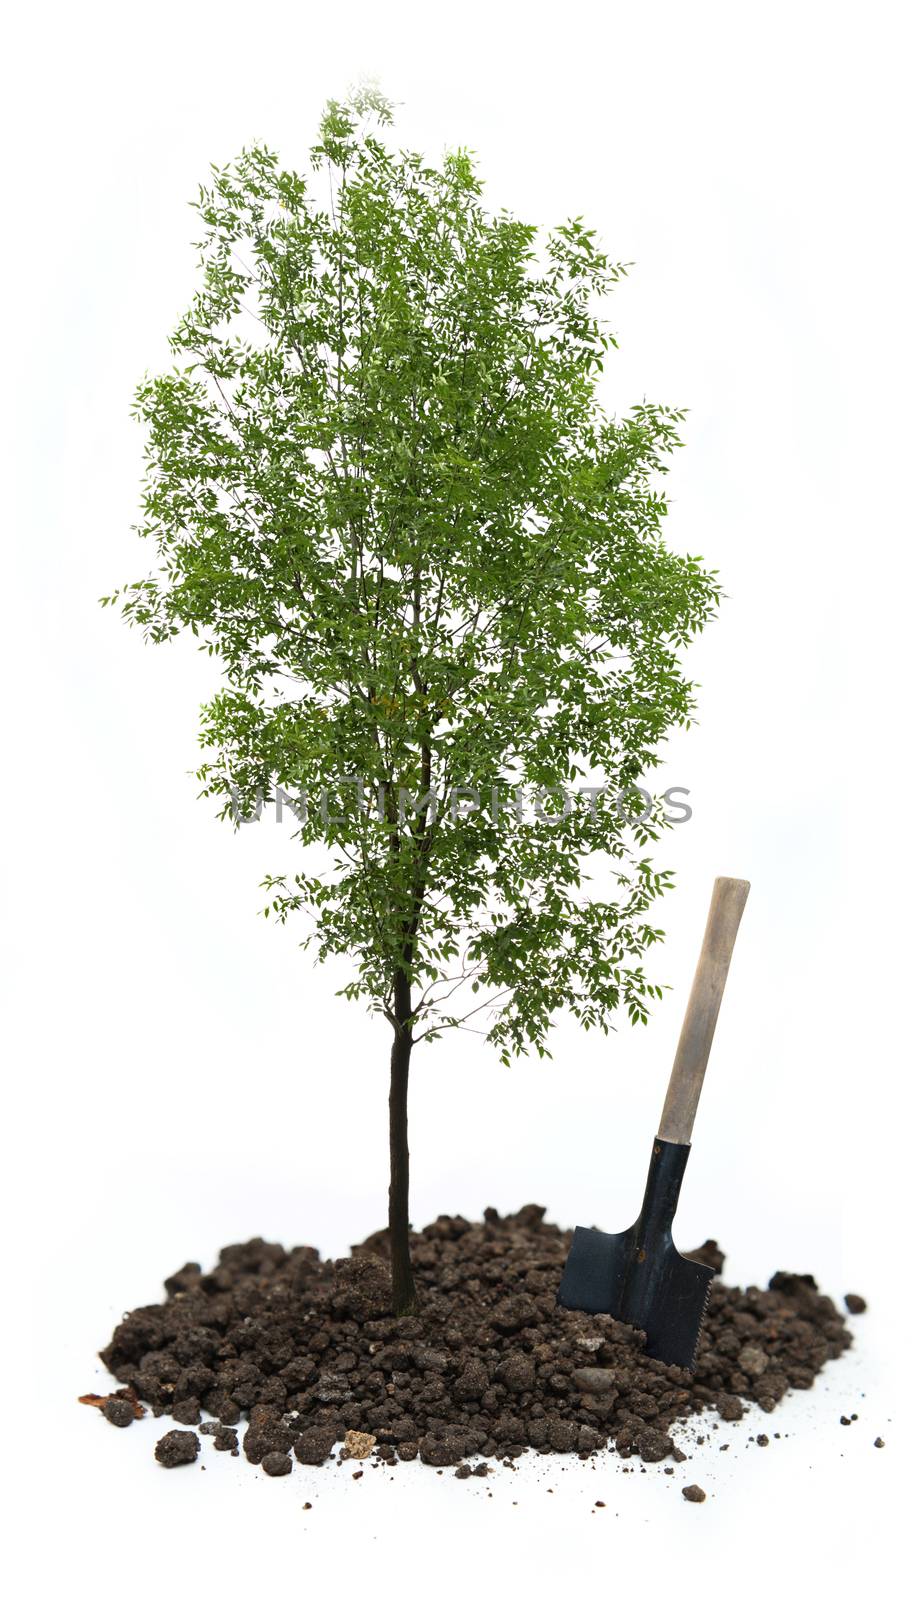 Green ash tree with a shovel